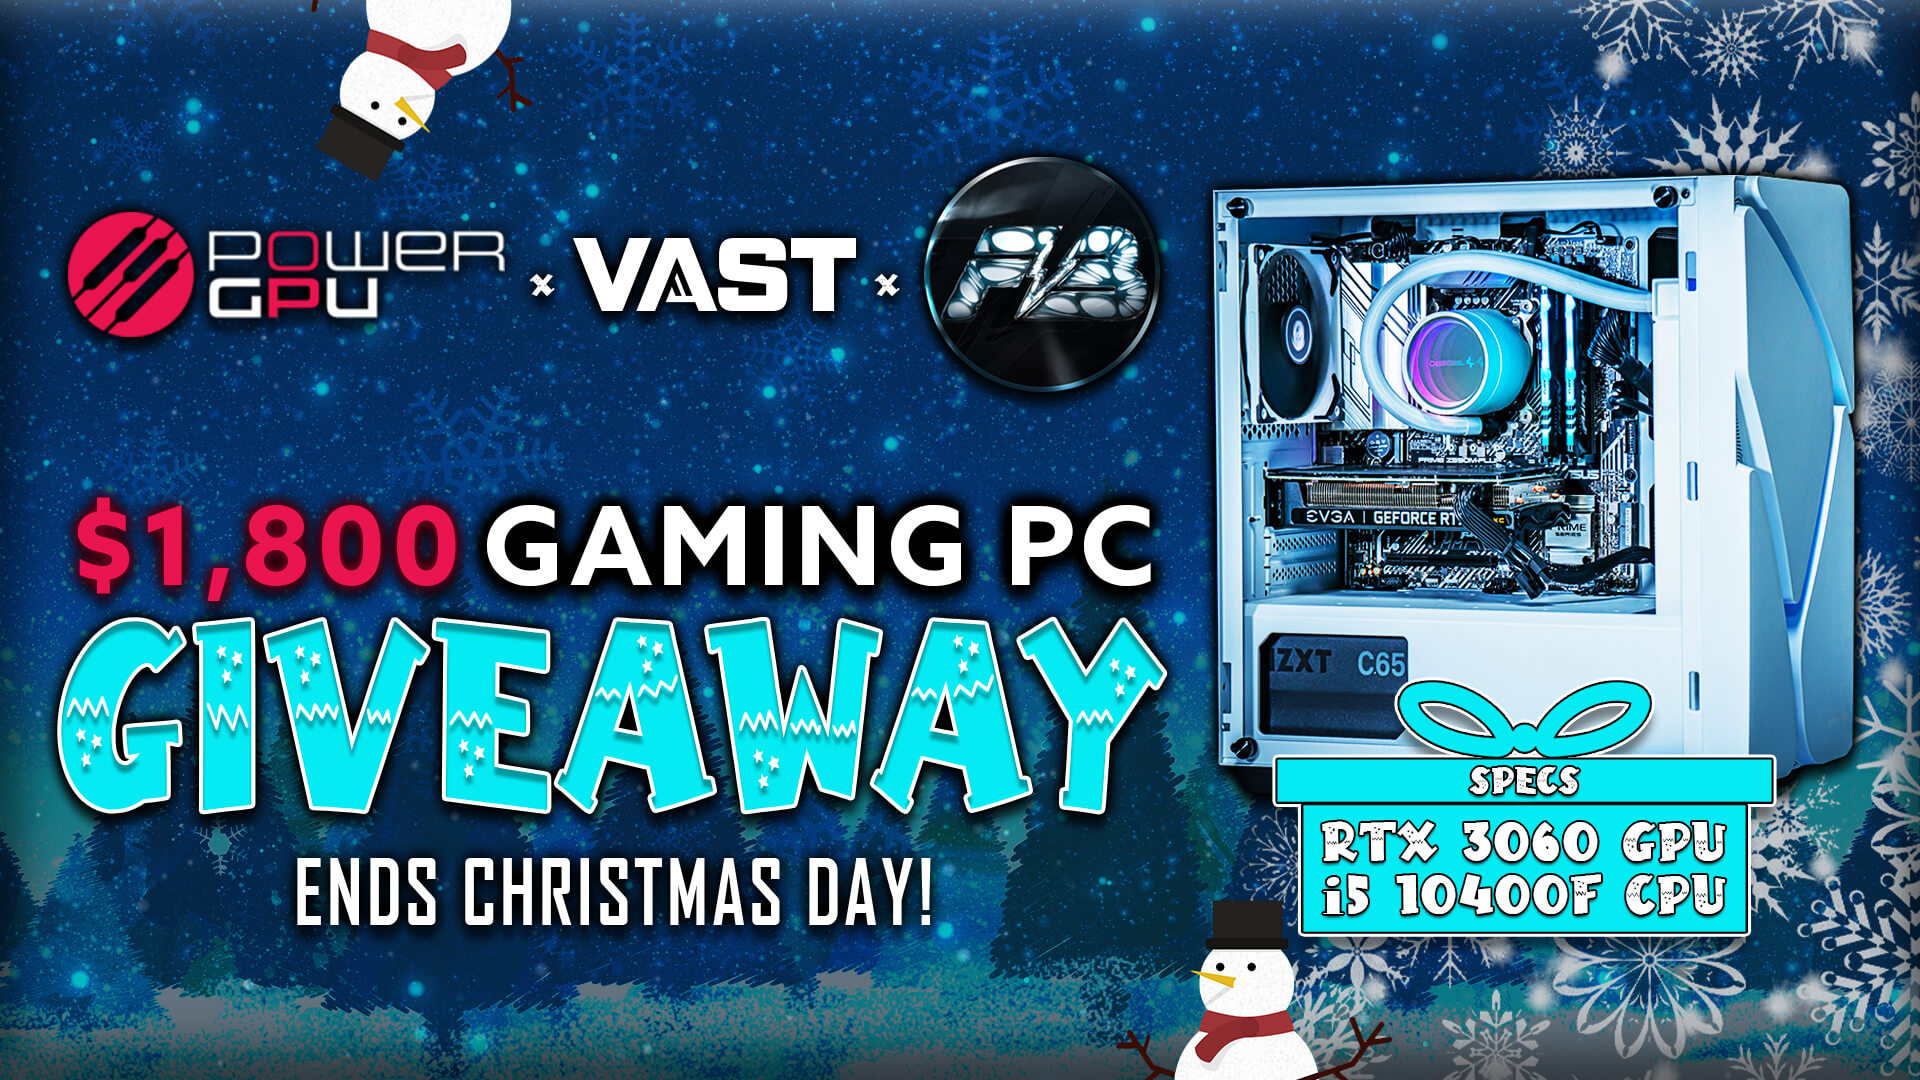 PC Services Optimizer Pro Giveaway - Giveaway of the Day